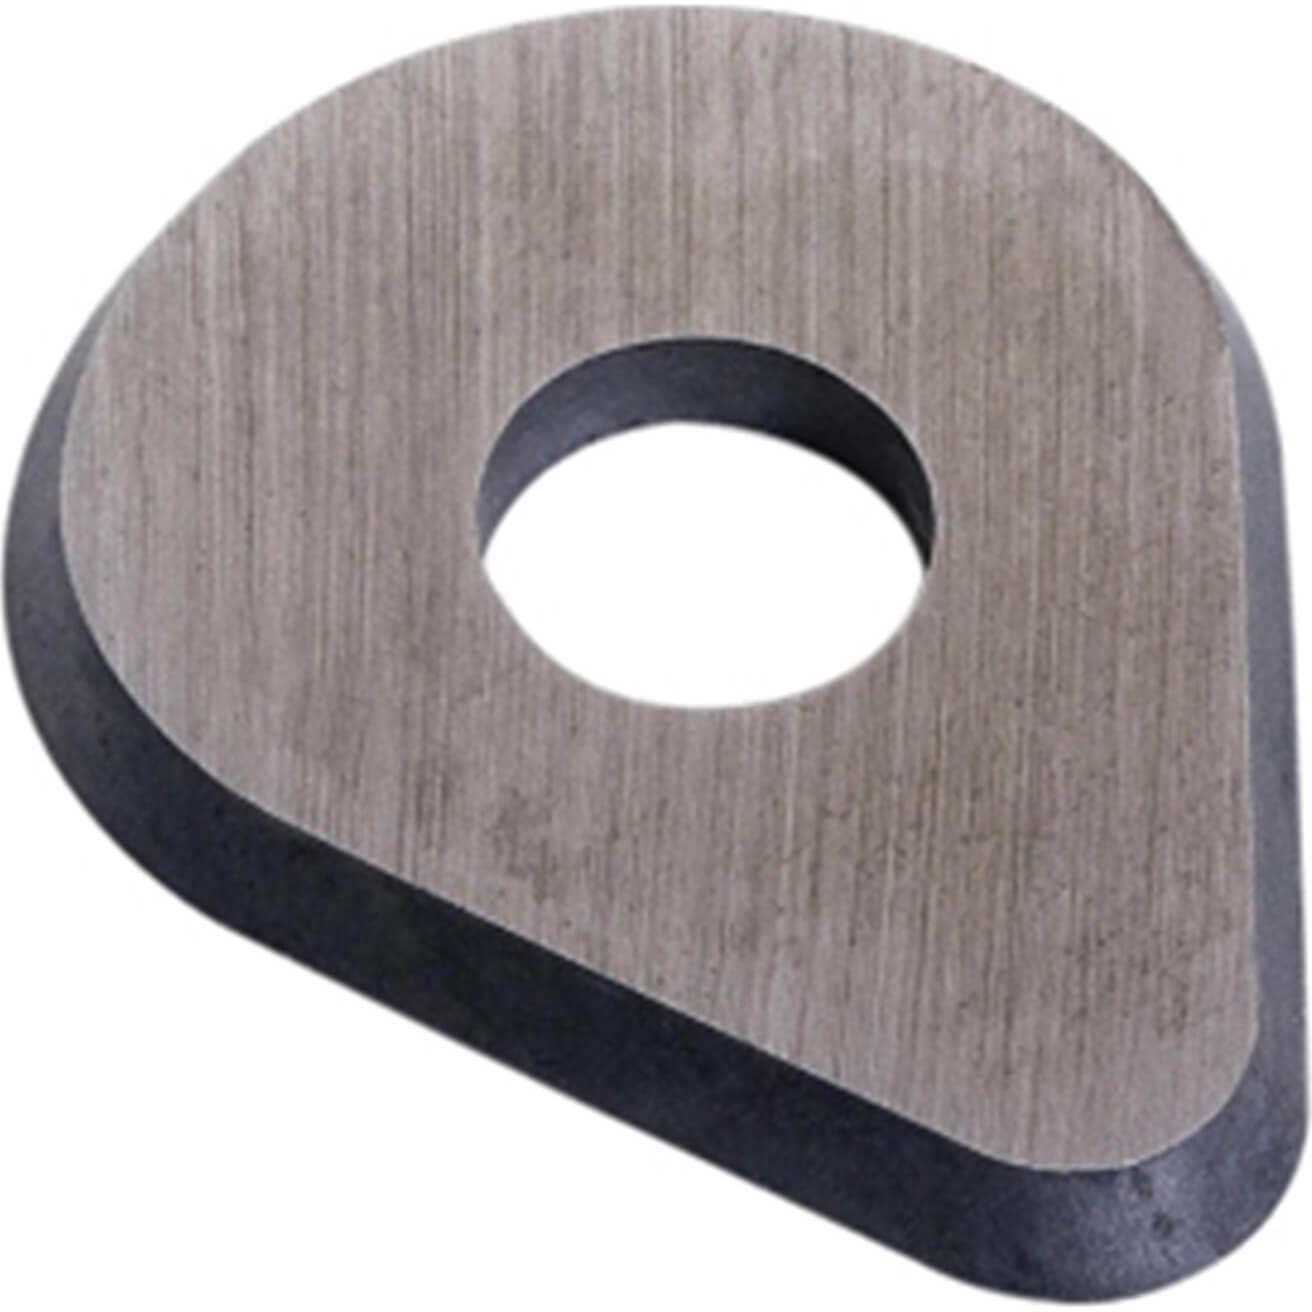 Image of Bahco Carbide Edged Blade for 625 Scraper Pear Shaped Blade